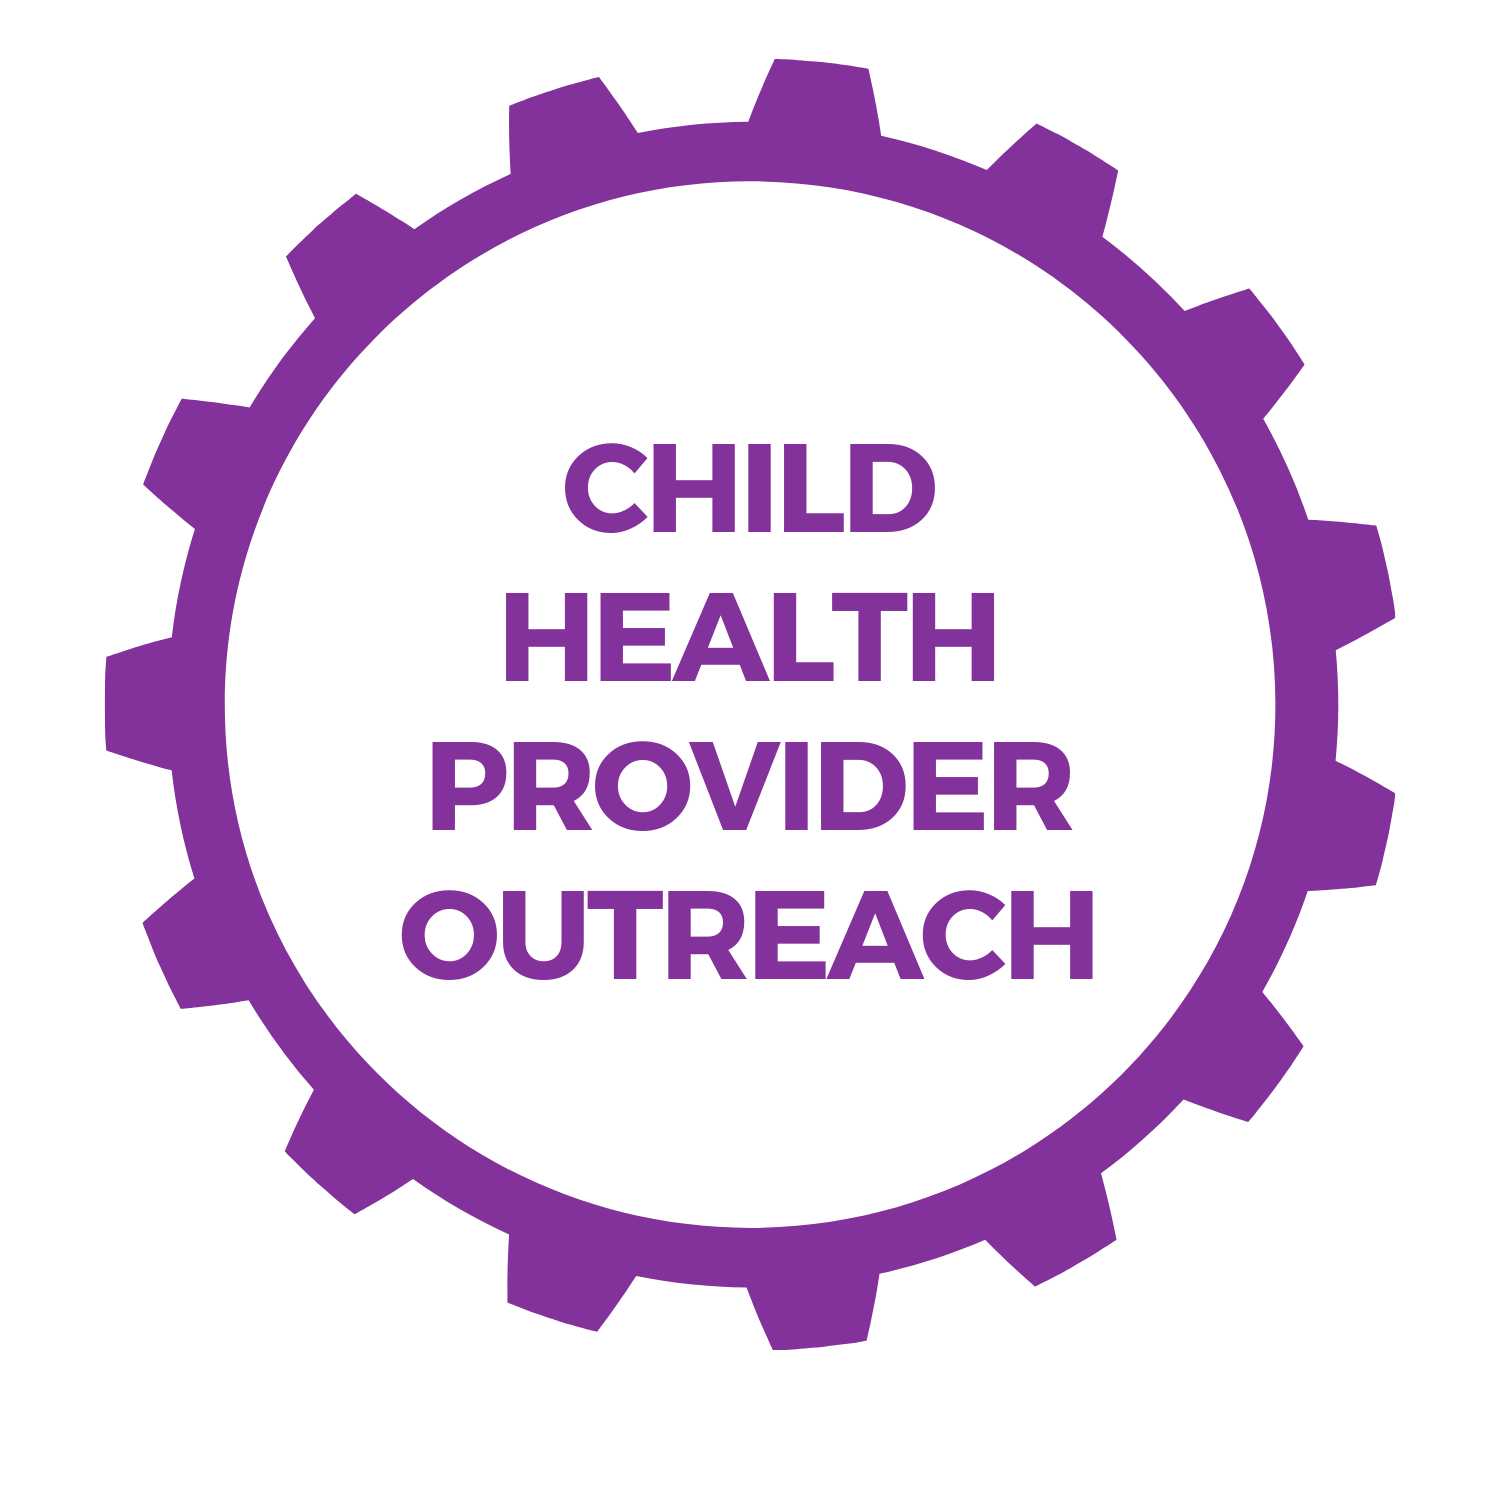  Image of a purple gear with Child Health Provider Outreach written on it 